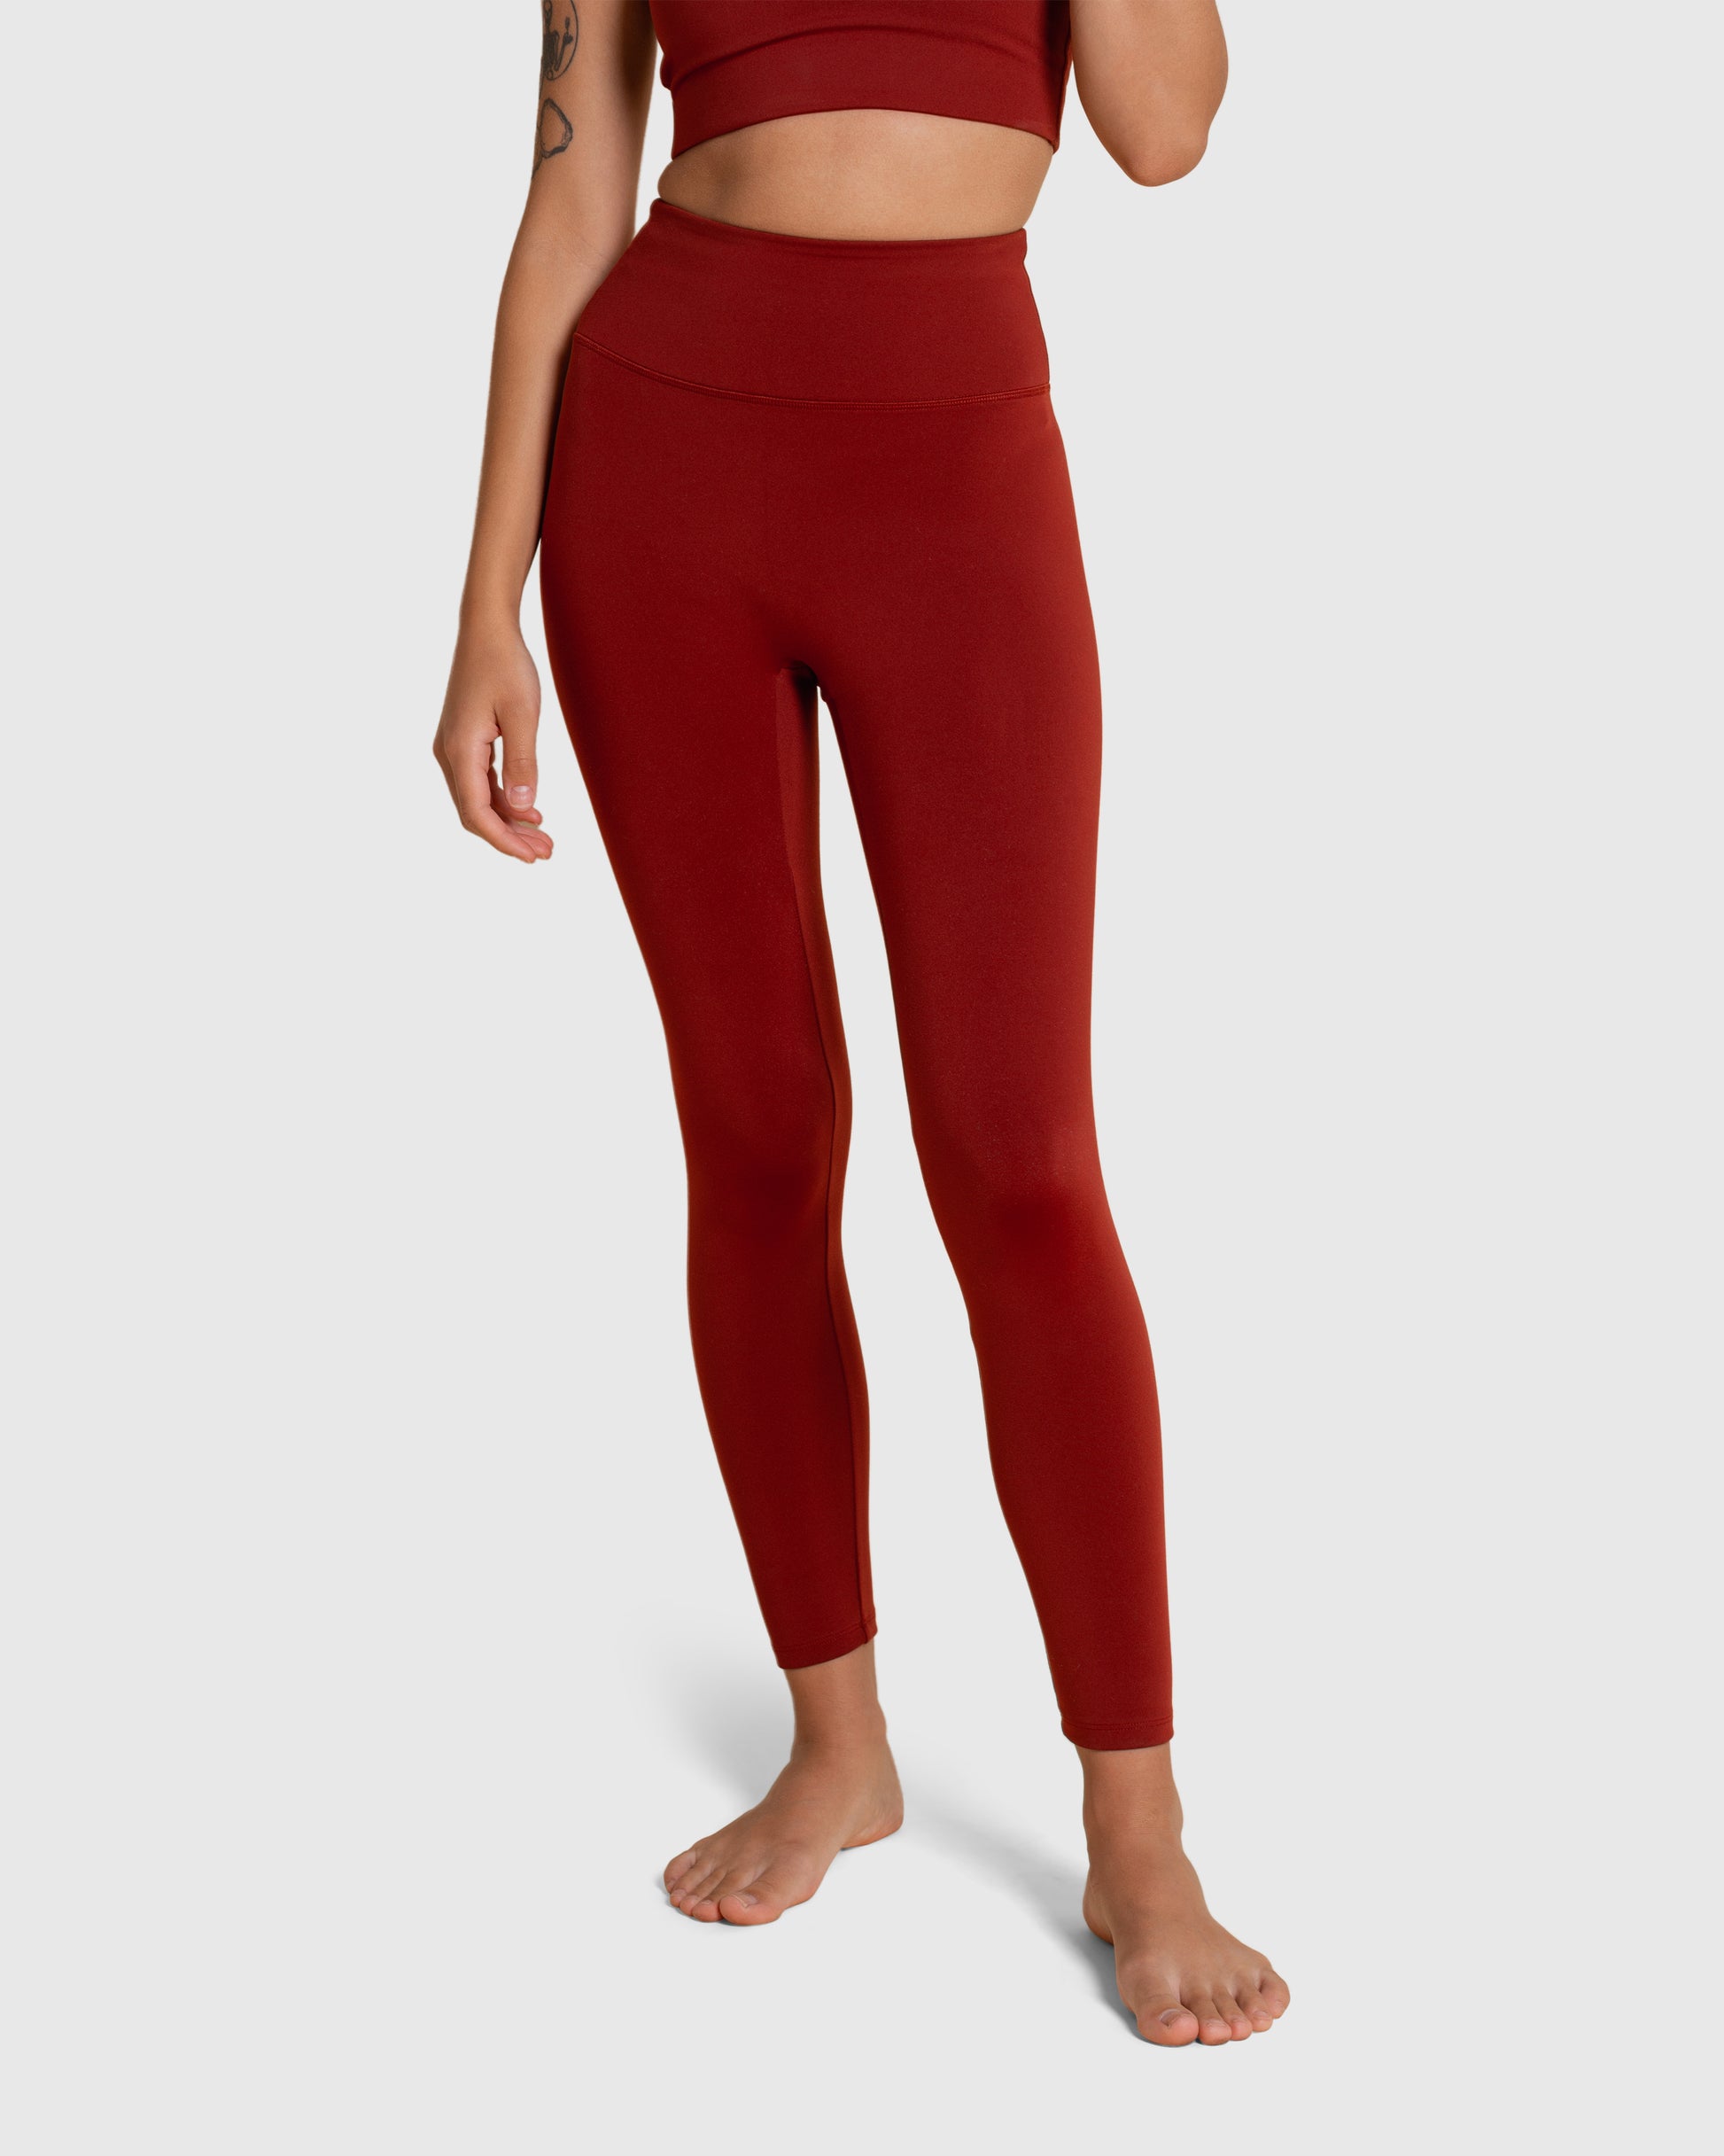 Girlfriend Collective Luxe Medium-Compression High-Rise Leggings